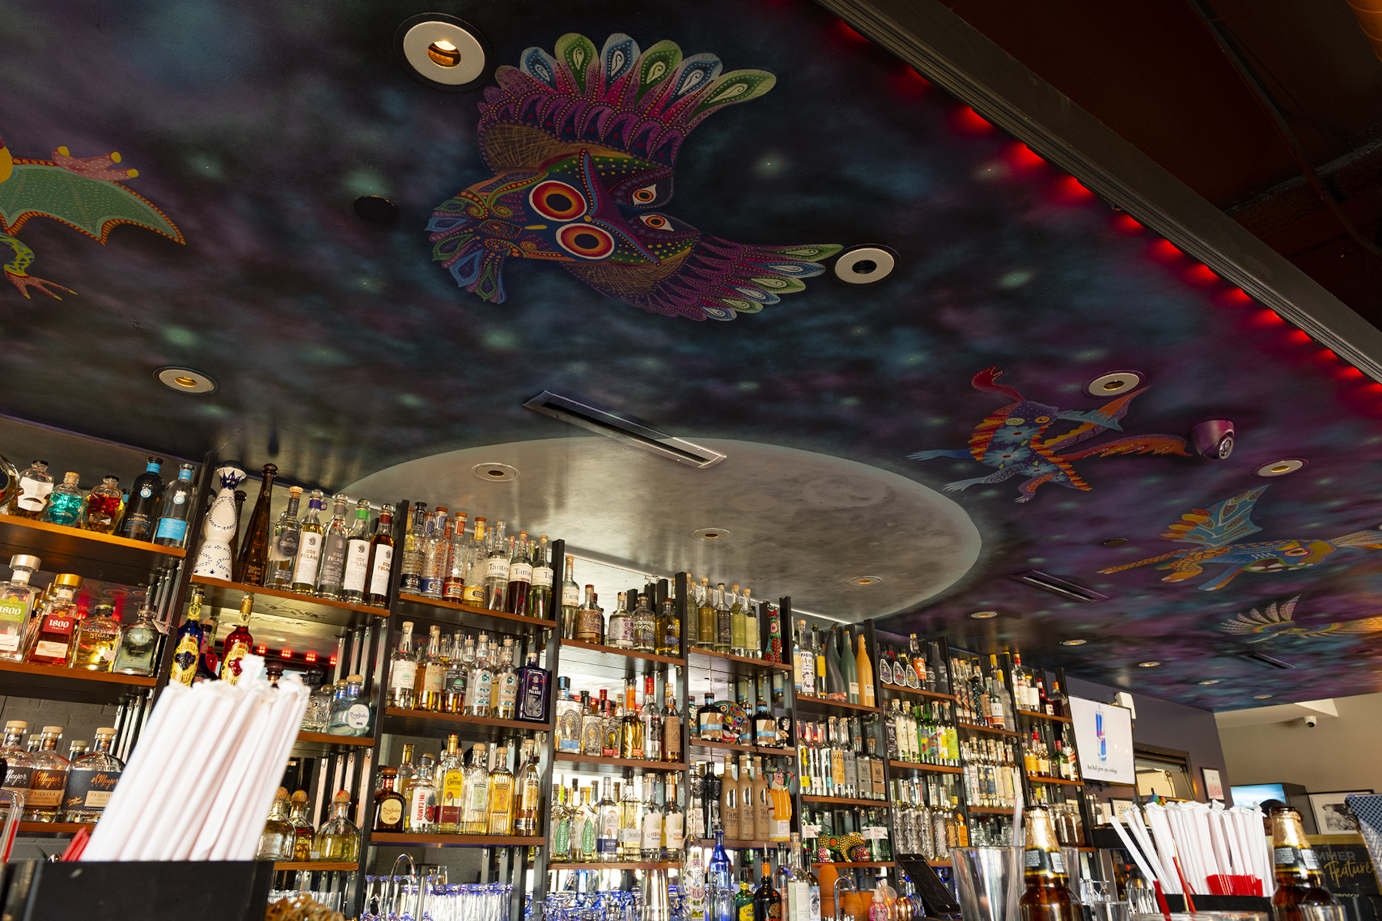 Interior, bar area, mural decoration on the ceiling